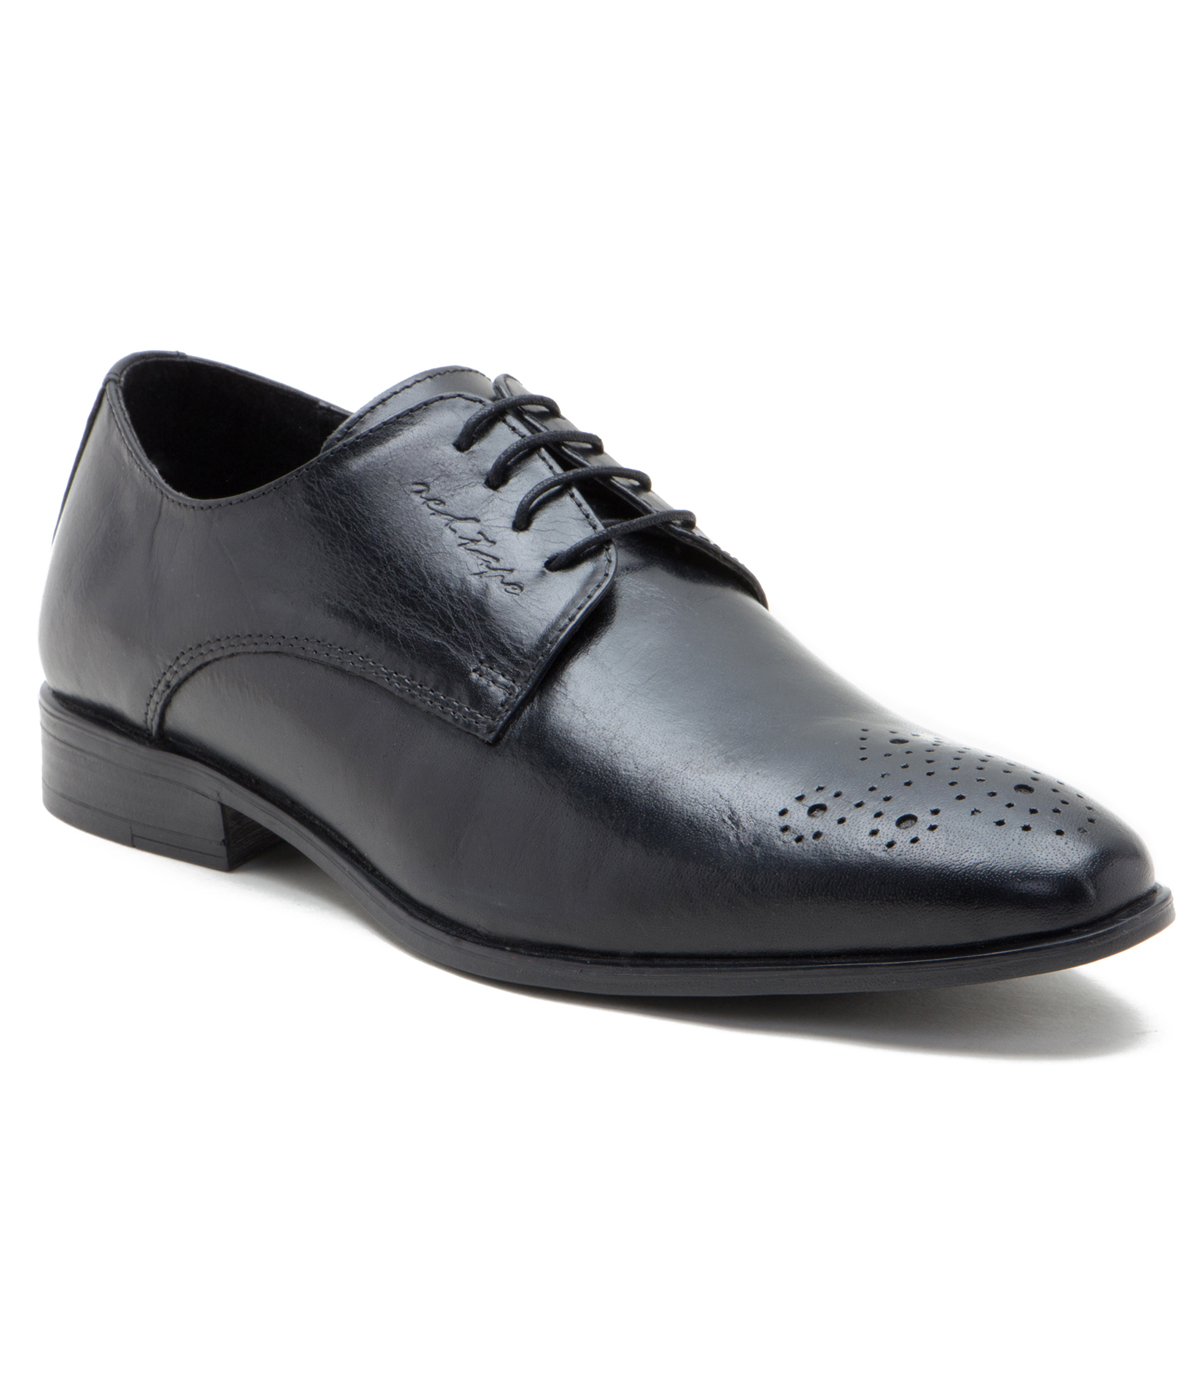 Buy Red Tape Mens Black Lace-up Shoes Online @ ₹1969 from ShopClues